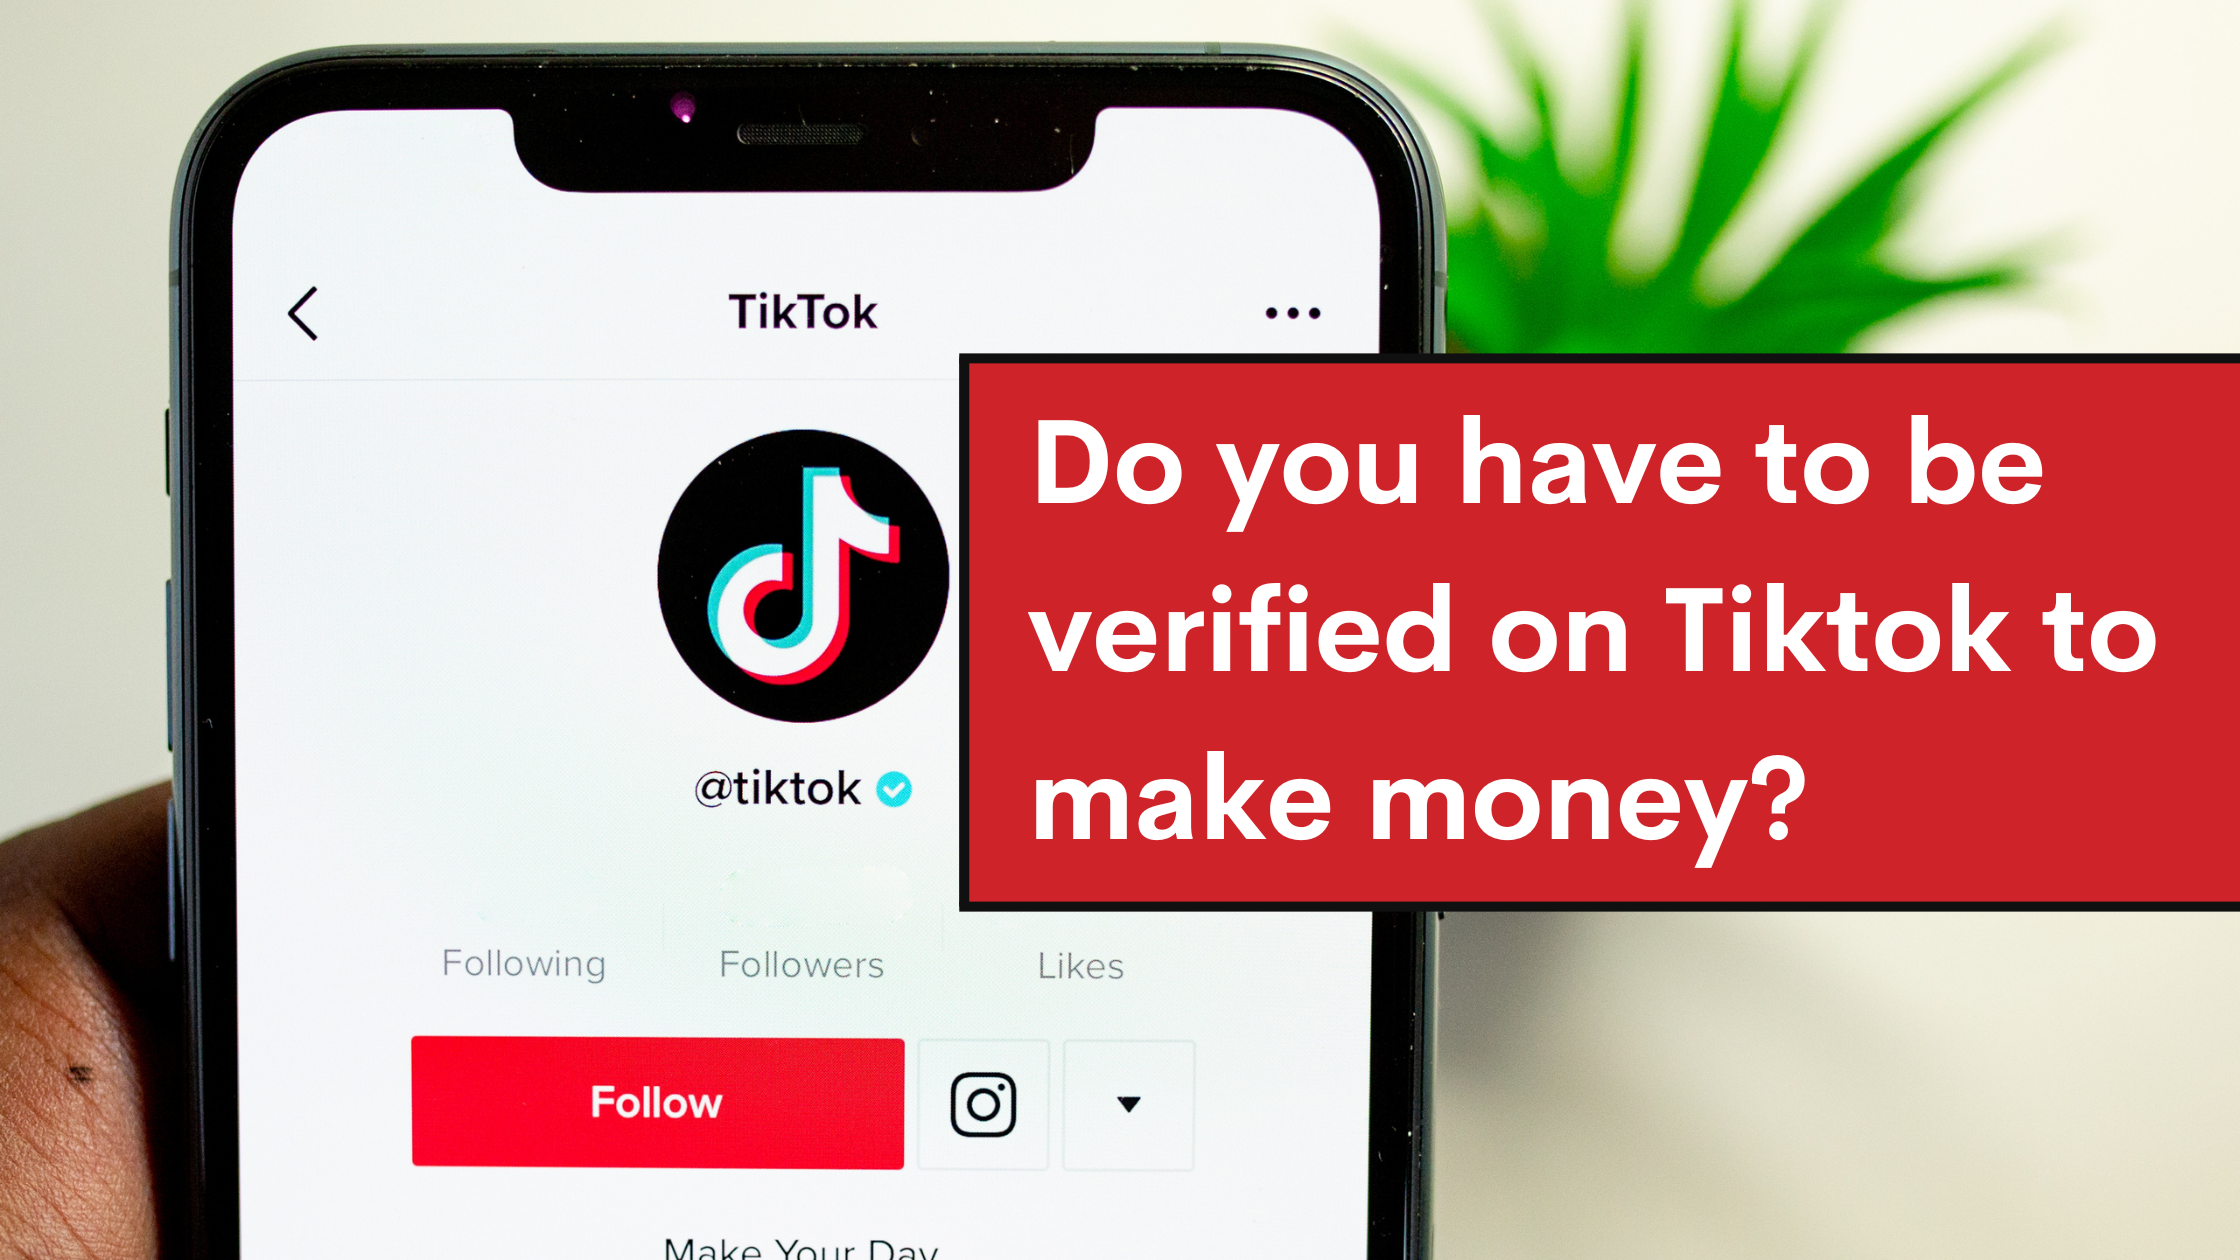 How to Get Verified on TikTok: What Can You Do to Increase Your